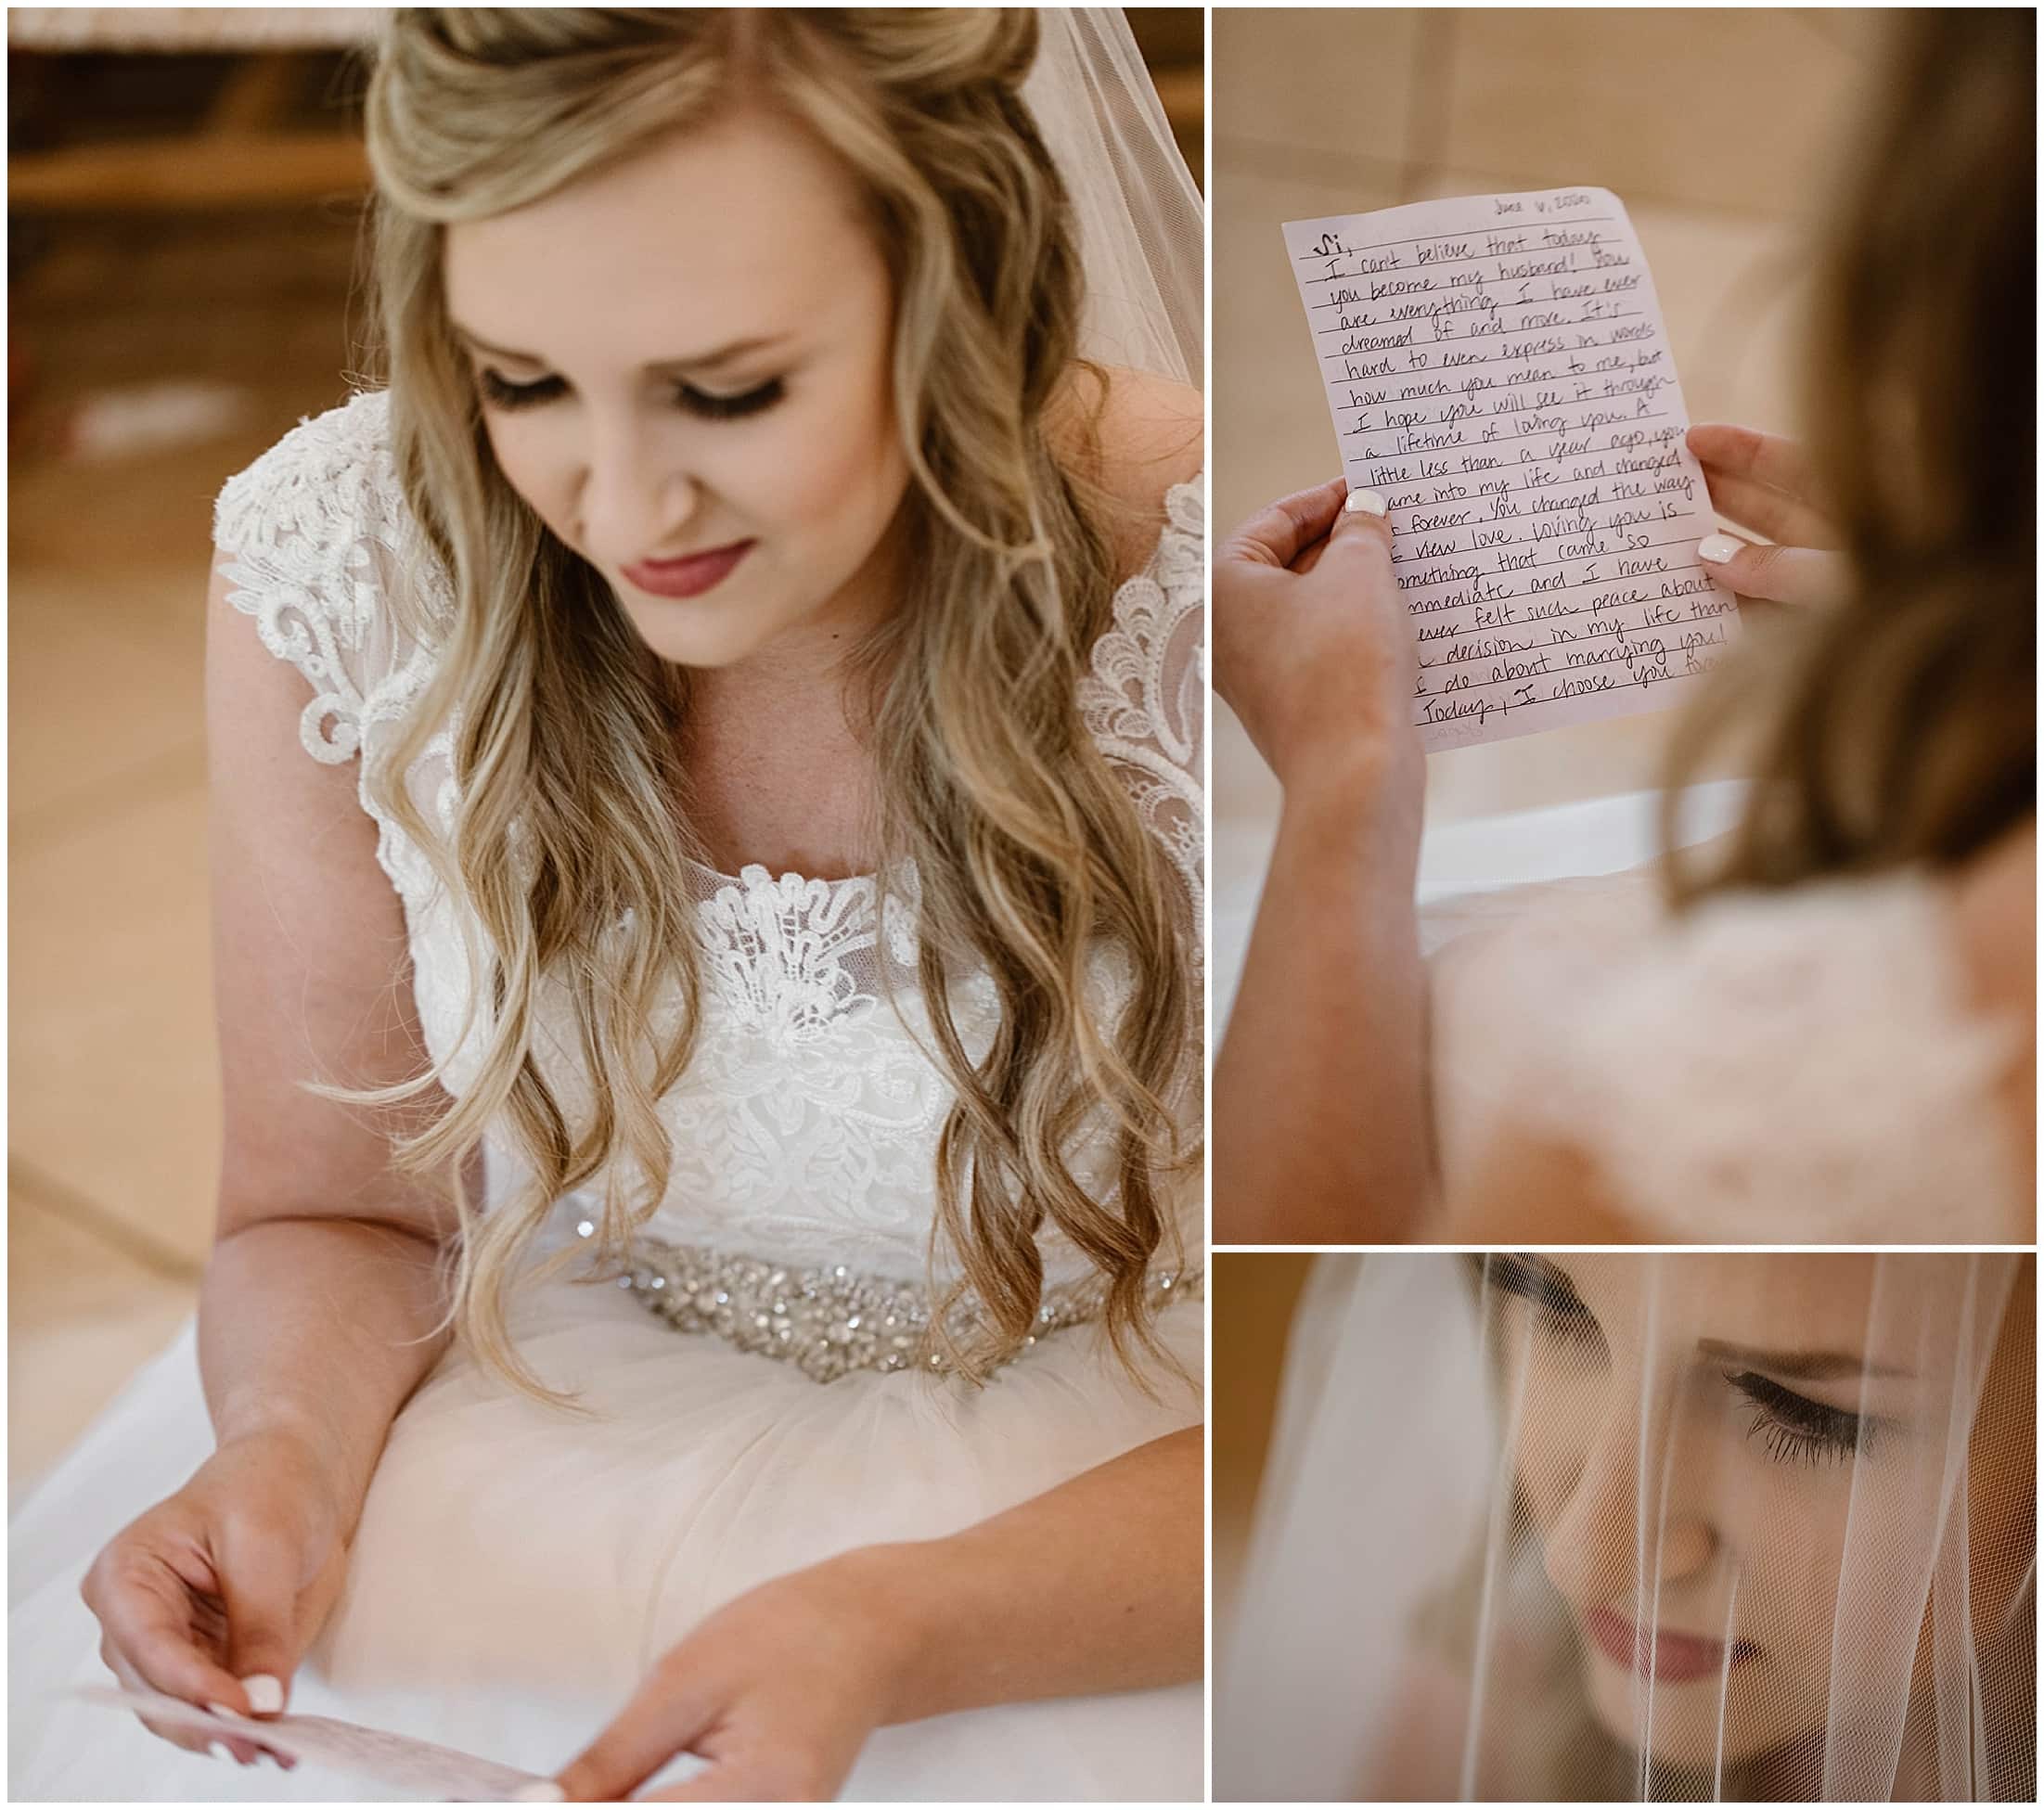 writing vows, Brit Nicole Photography, West Texas Barn Wedding, West Texas Small Wedding, West Texas wedding venue, DJ Platinum, Vera Wang engagement ring, Zales Manly Bands wedding ring, David's Bridal wedding dress, Krazy Cakes brides wedding cake, wedding cupcake, Betsey Johnson wedding high heels, Joy's Downtown Flowers wedding decor, Sparrow Creek Ranch, texas wedding ranch, places to get married in Texas, small intimate wedding, summer wedding, texas sky, bride and groom first look, first look with dad, matching bridesmaids robes, June wedding, junebug weddings, wandering weddings, the knot, best weddings